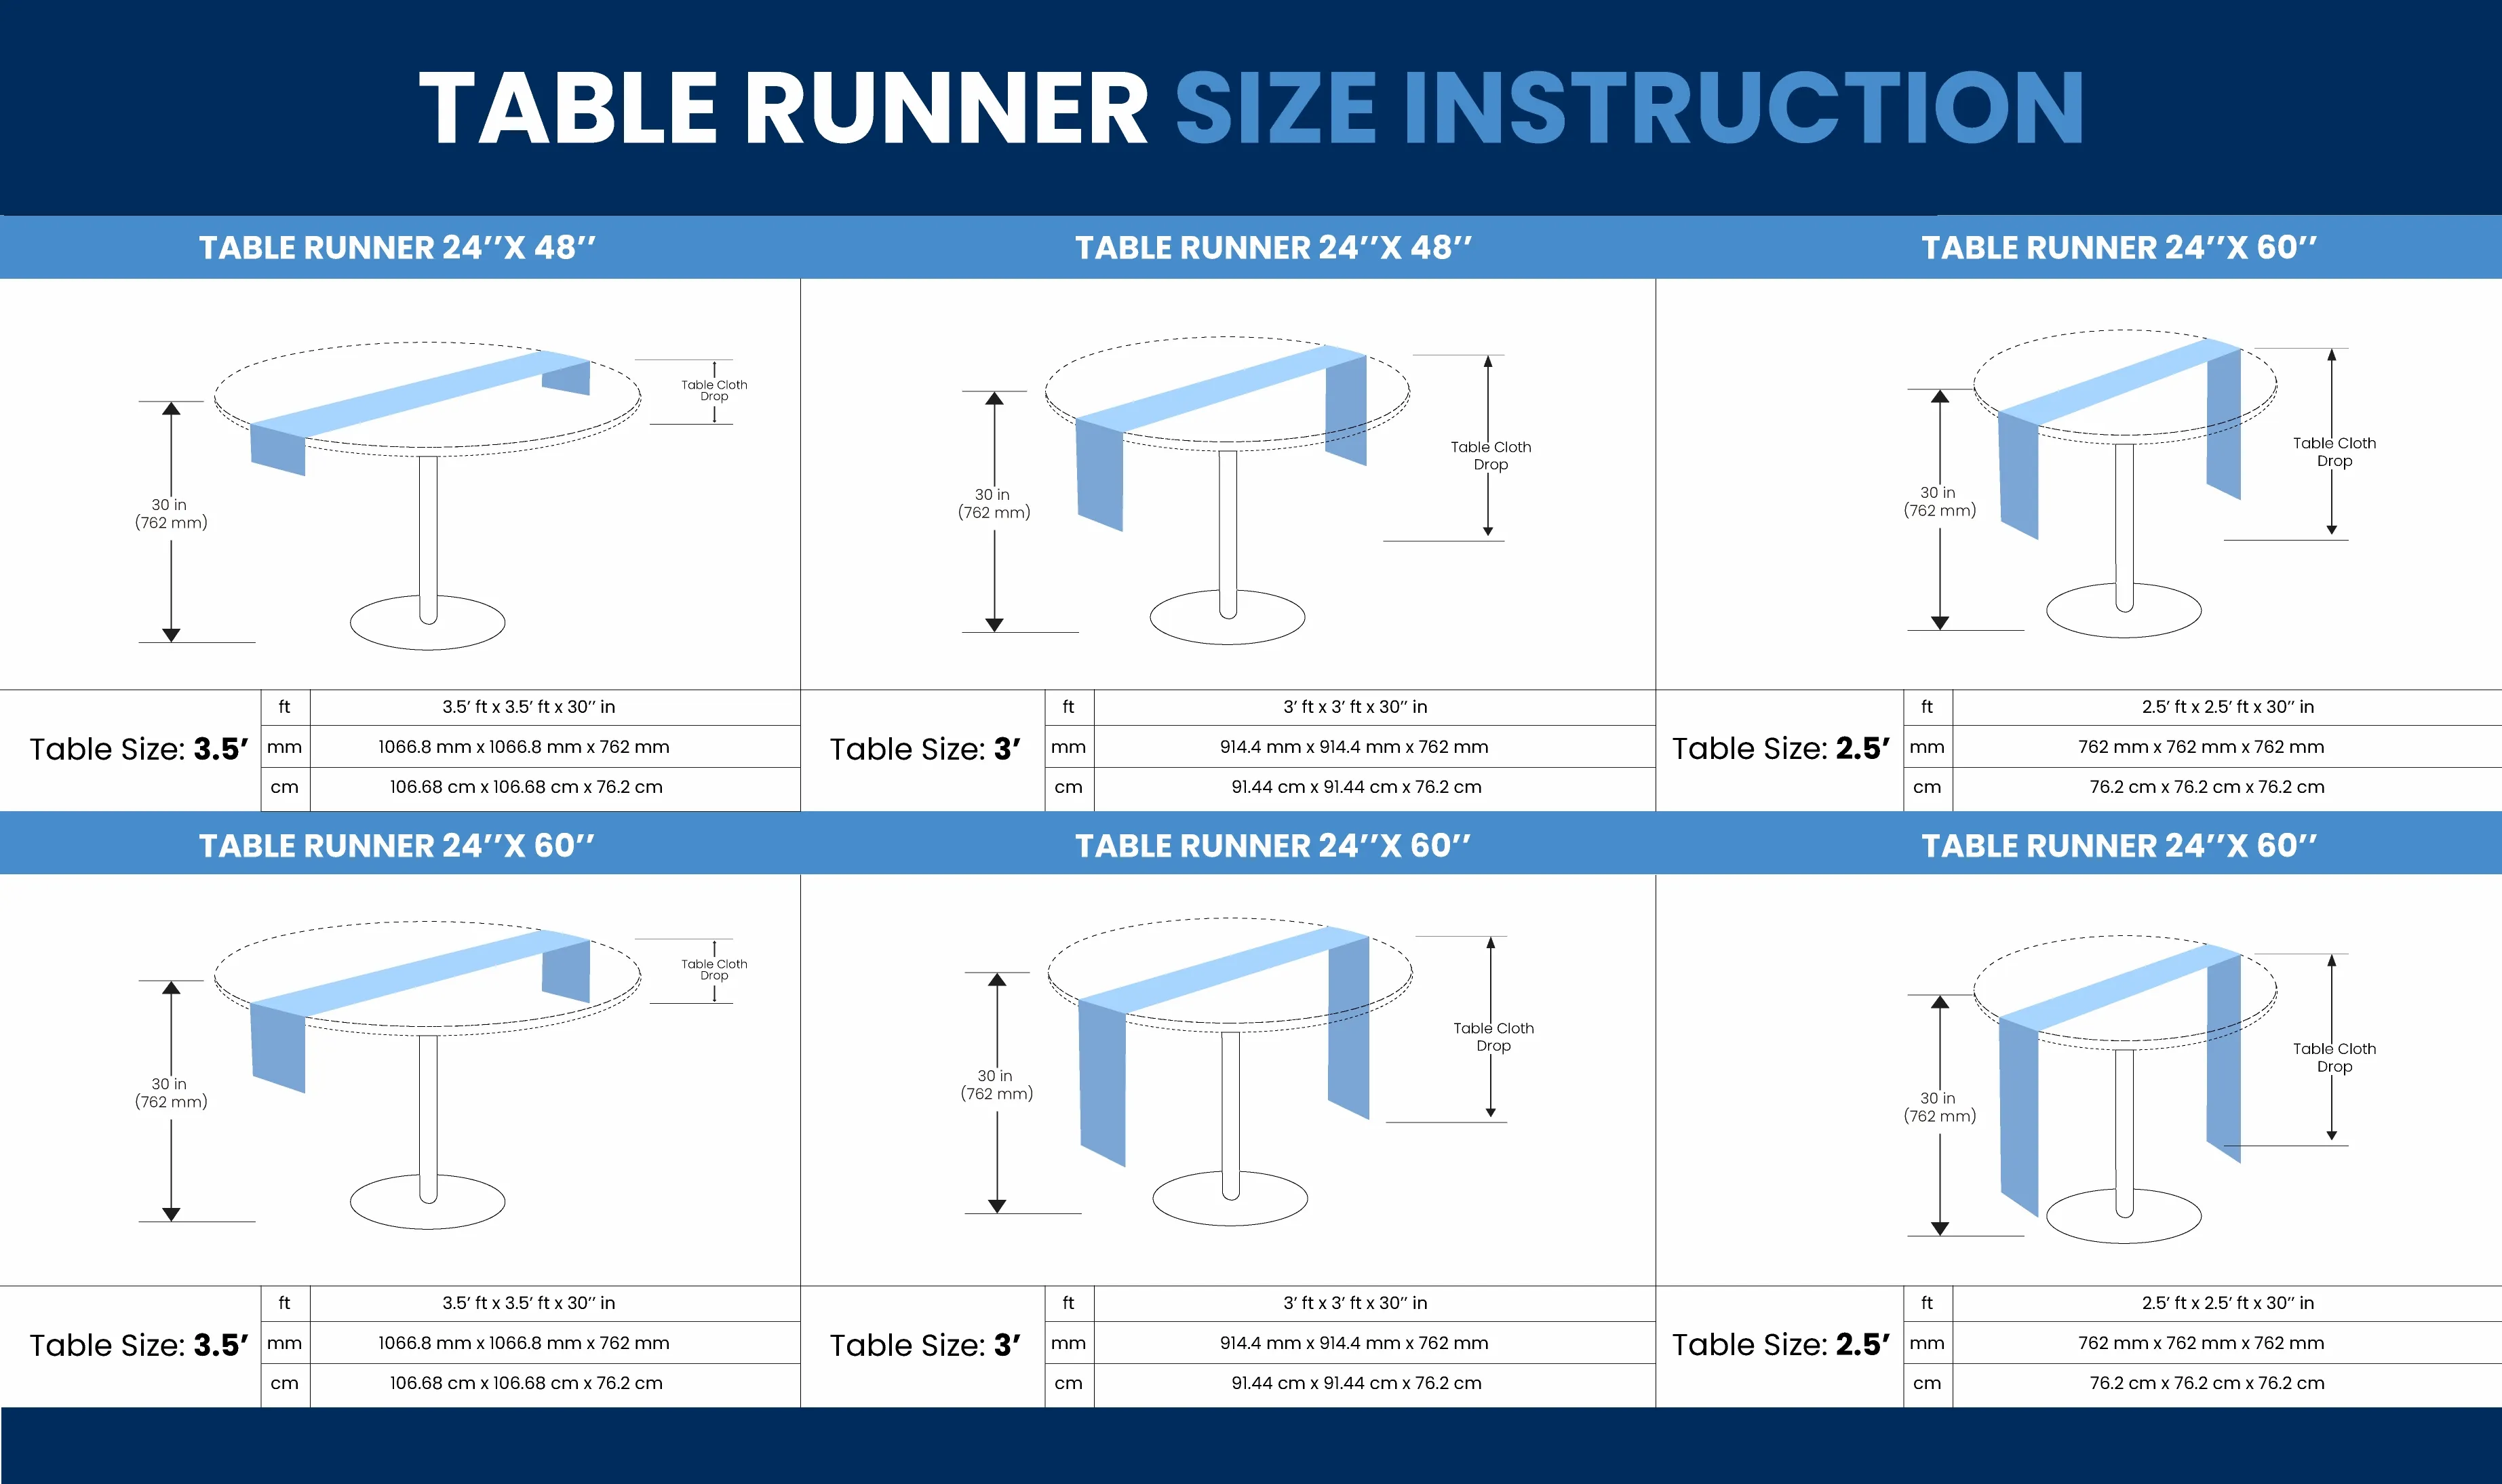 Standard Table Runner Sizes That Fits Your Table